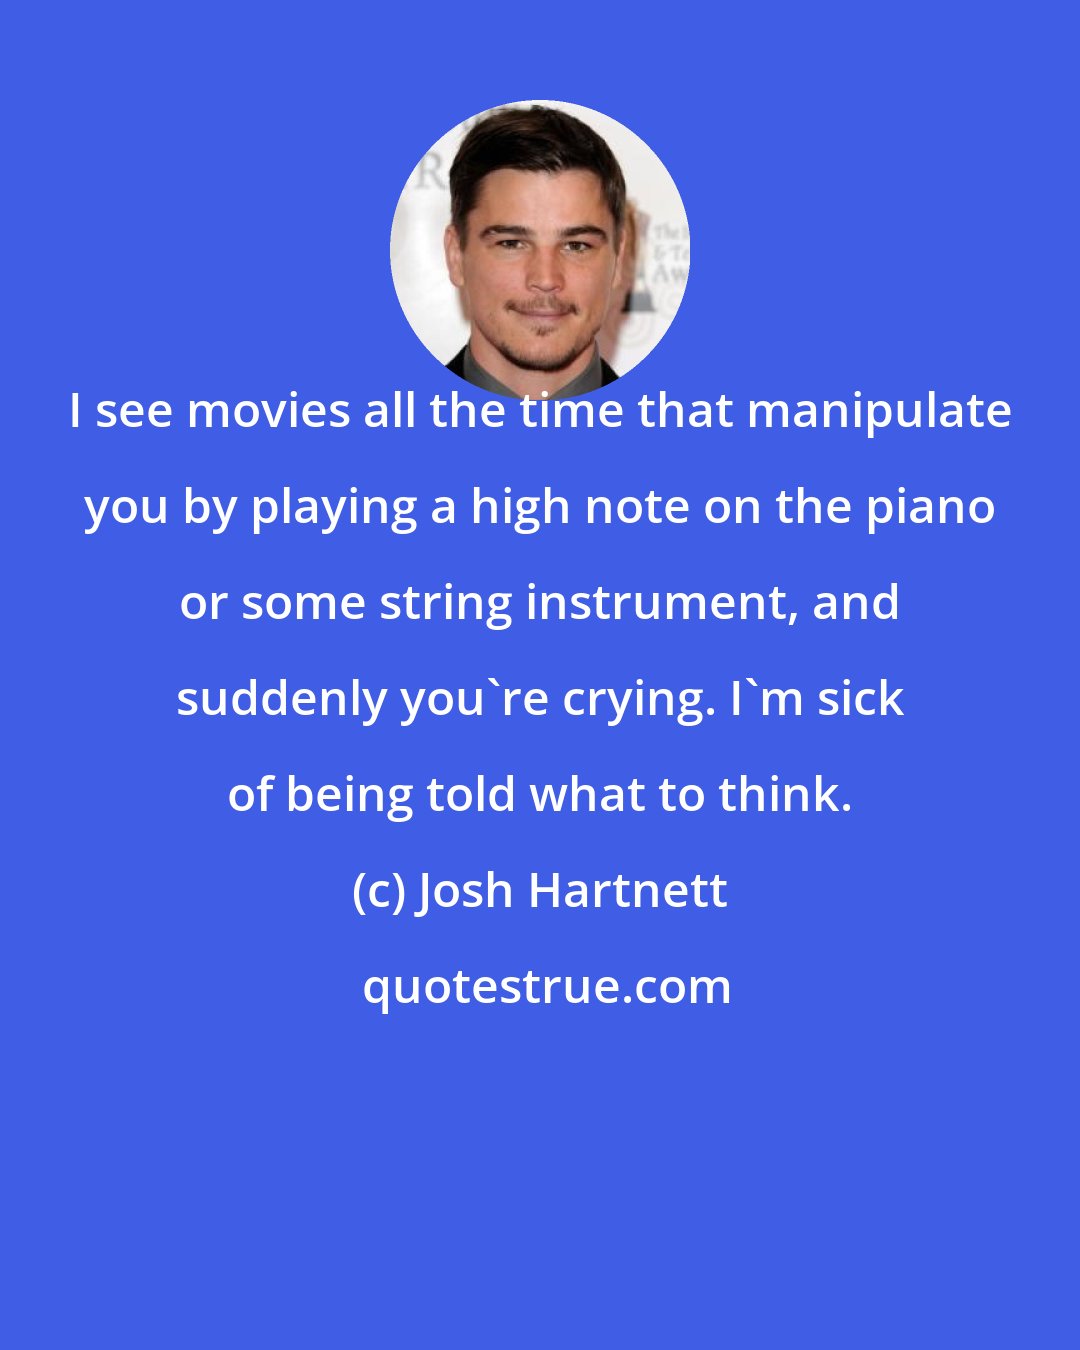 Josh Hartnett: I see movies all the time that manipulate you by playing a high note on the piano or some string instrument, and suddenly you're crying. I'm sick of being told what to think.